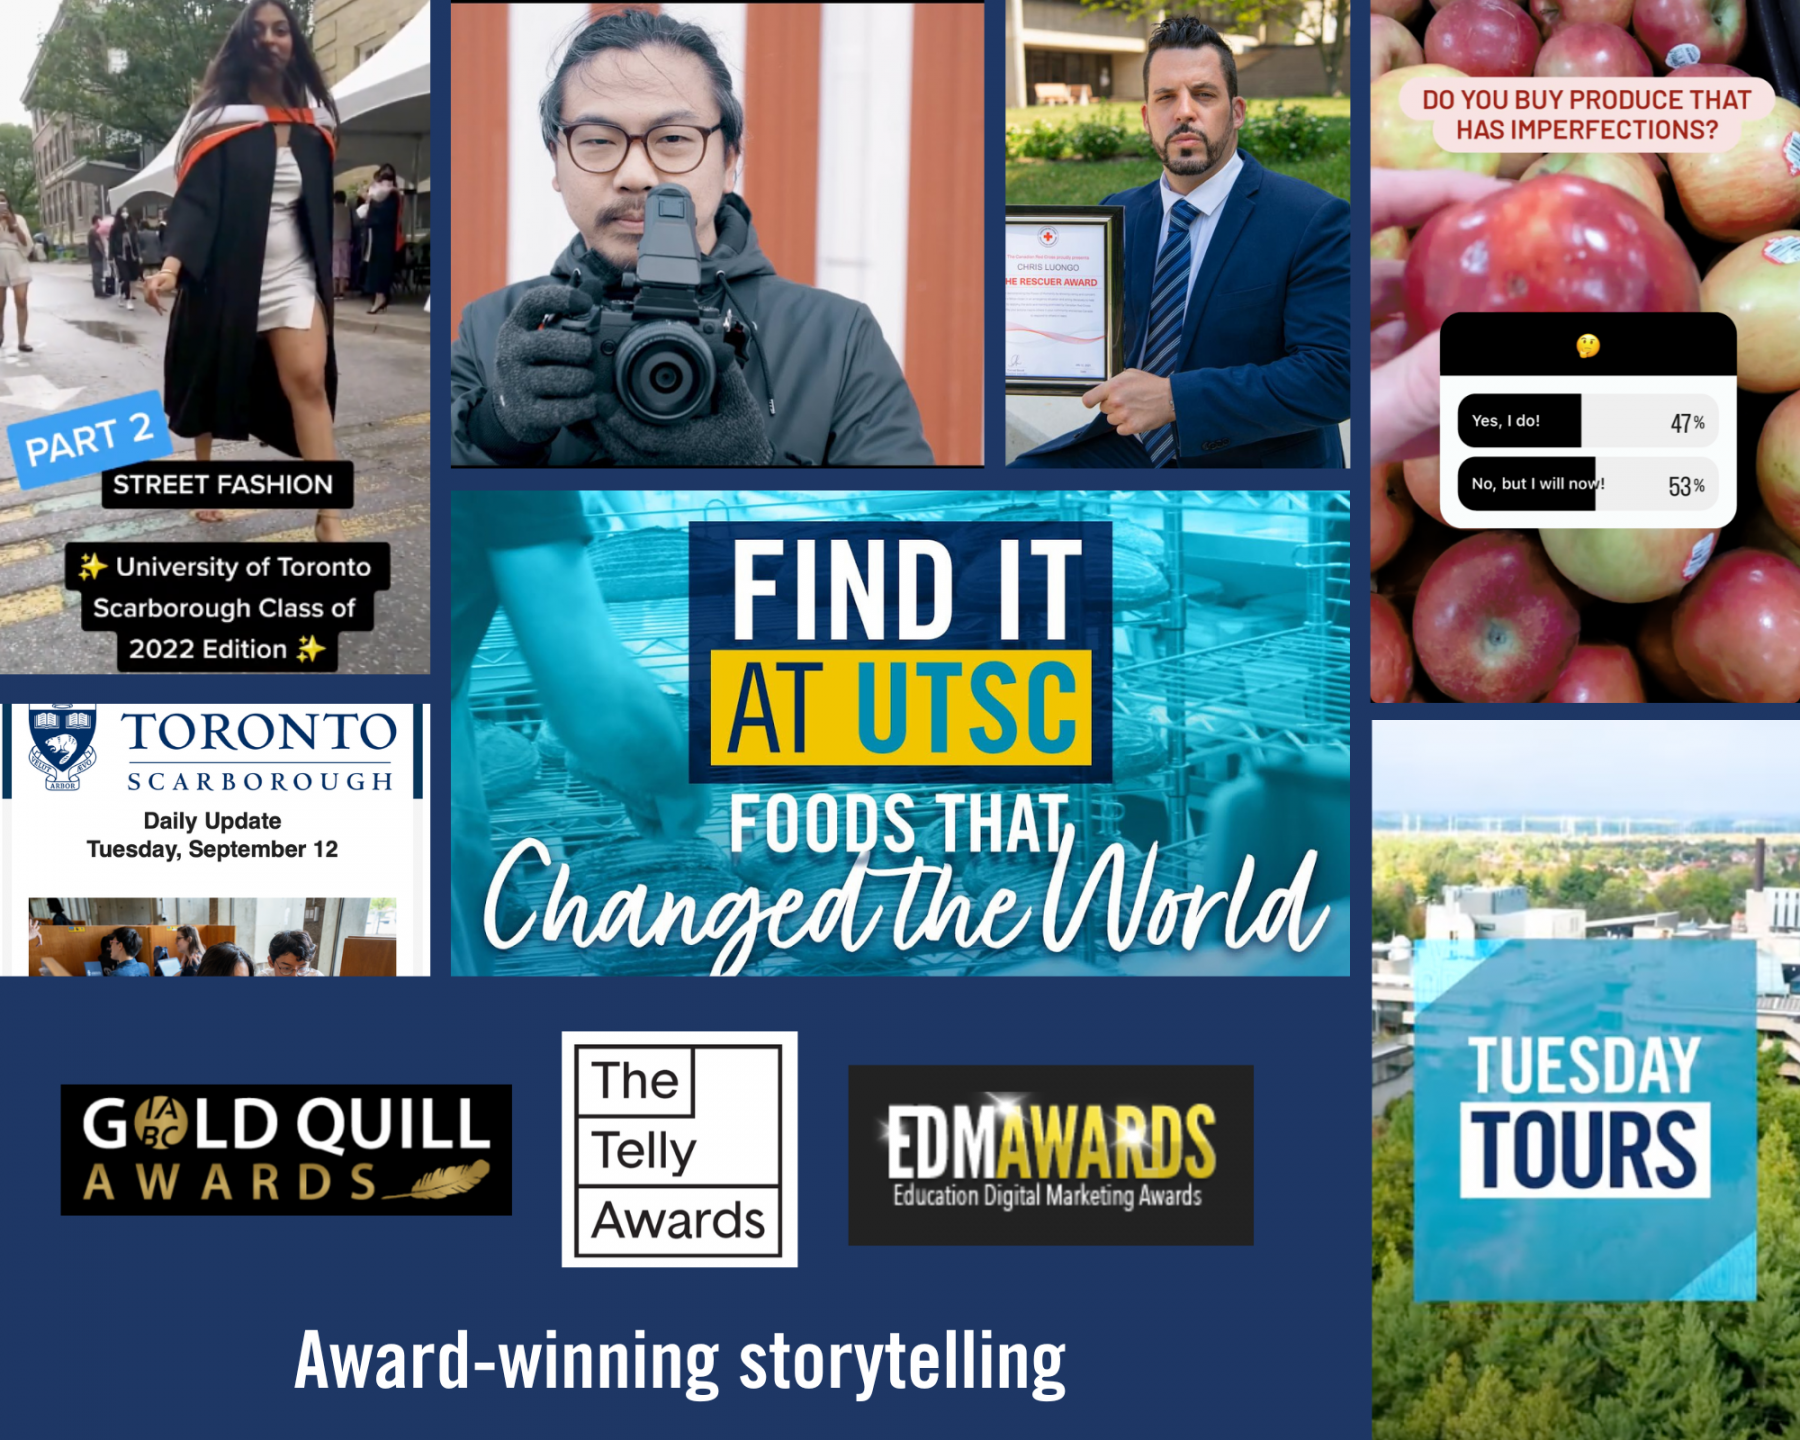 Collage - Award winning storytelling with logos of IABC Gold Quill awards, The Telly Awards, EDM awards, and images of street convocation fashion, Find it at UTSC video series, images from news stories, Daily Update header